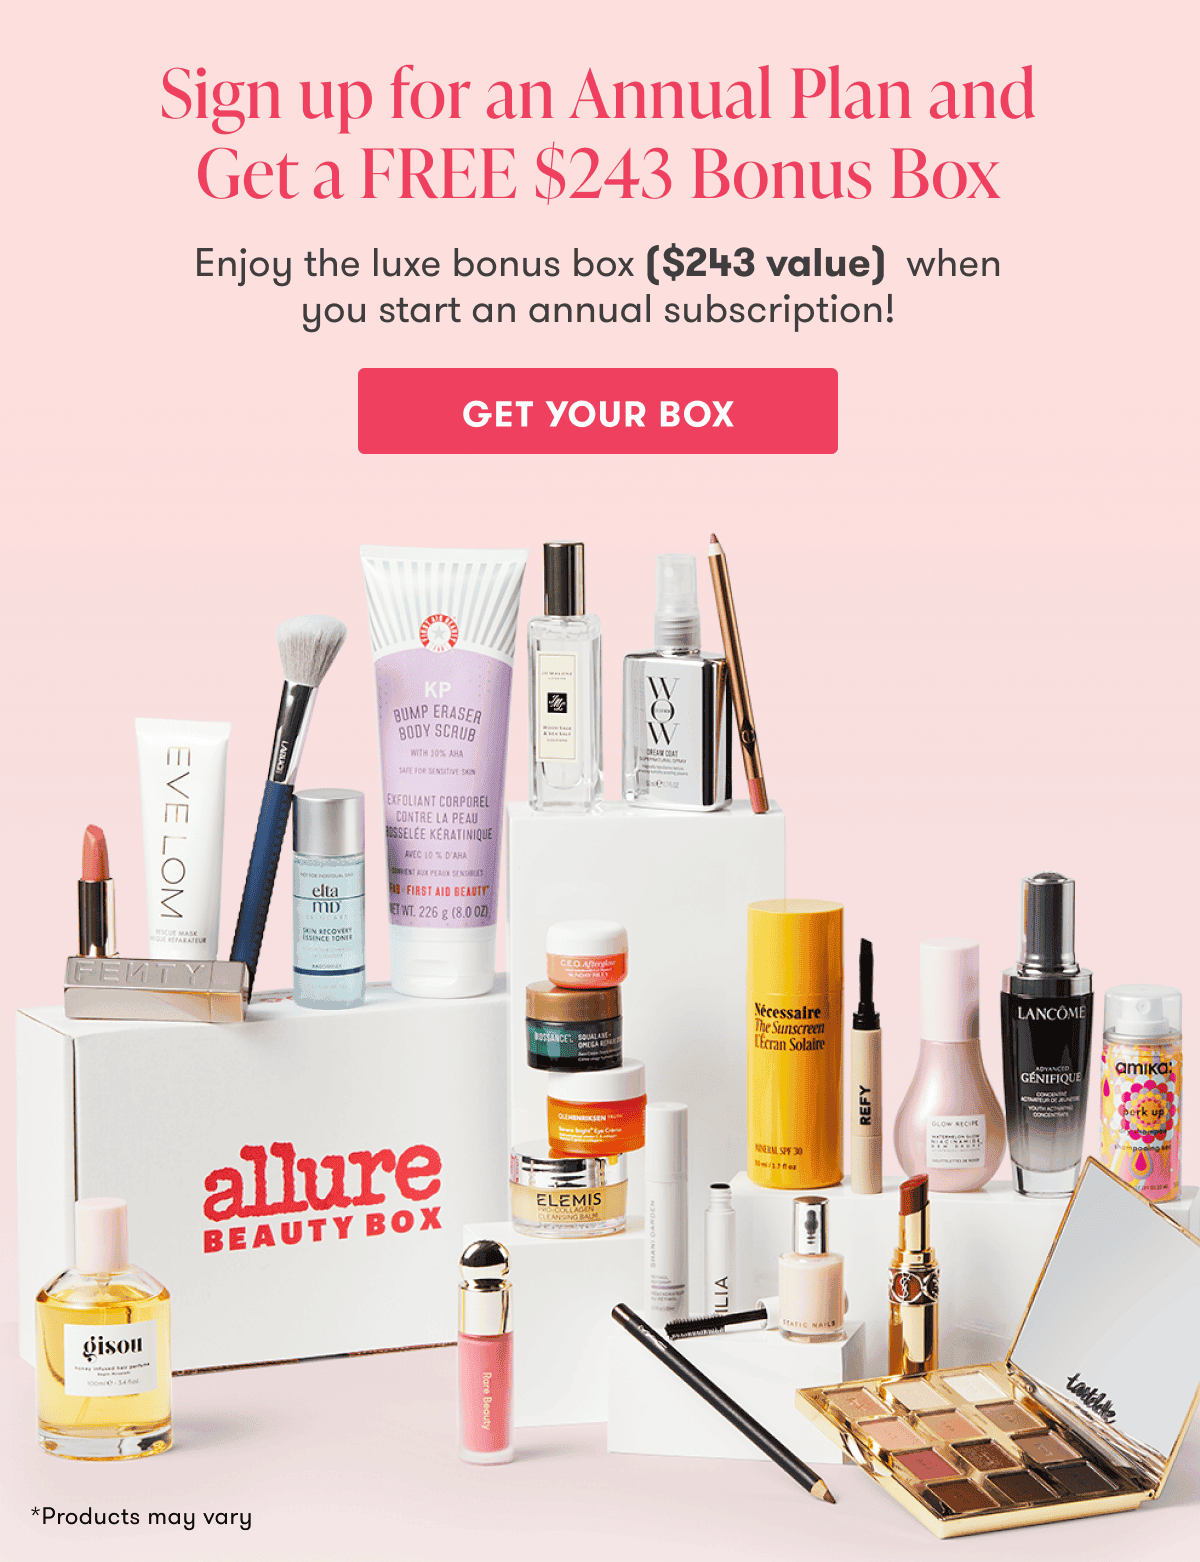 Sign up for an Annual Plan and Get a FREE \\$243 Bonus Box. Enjoy the luxe bonus box (\\$243 value) when you start an annual subscription! Get your box.